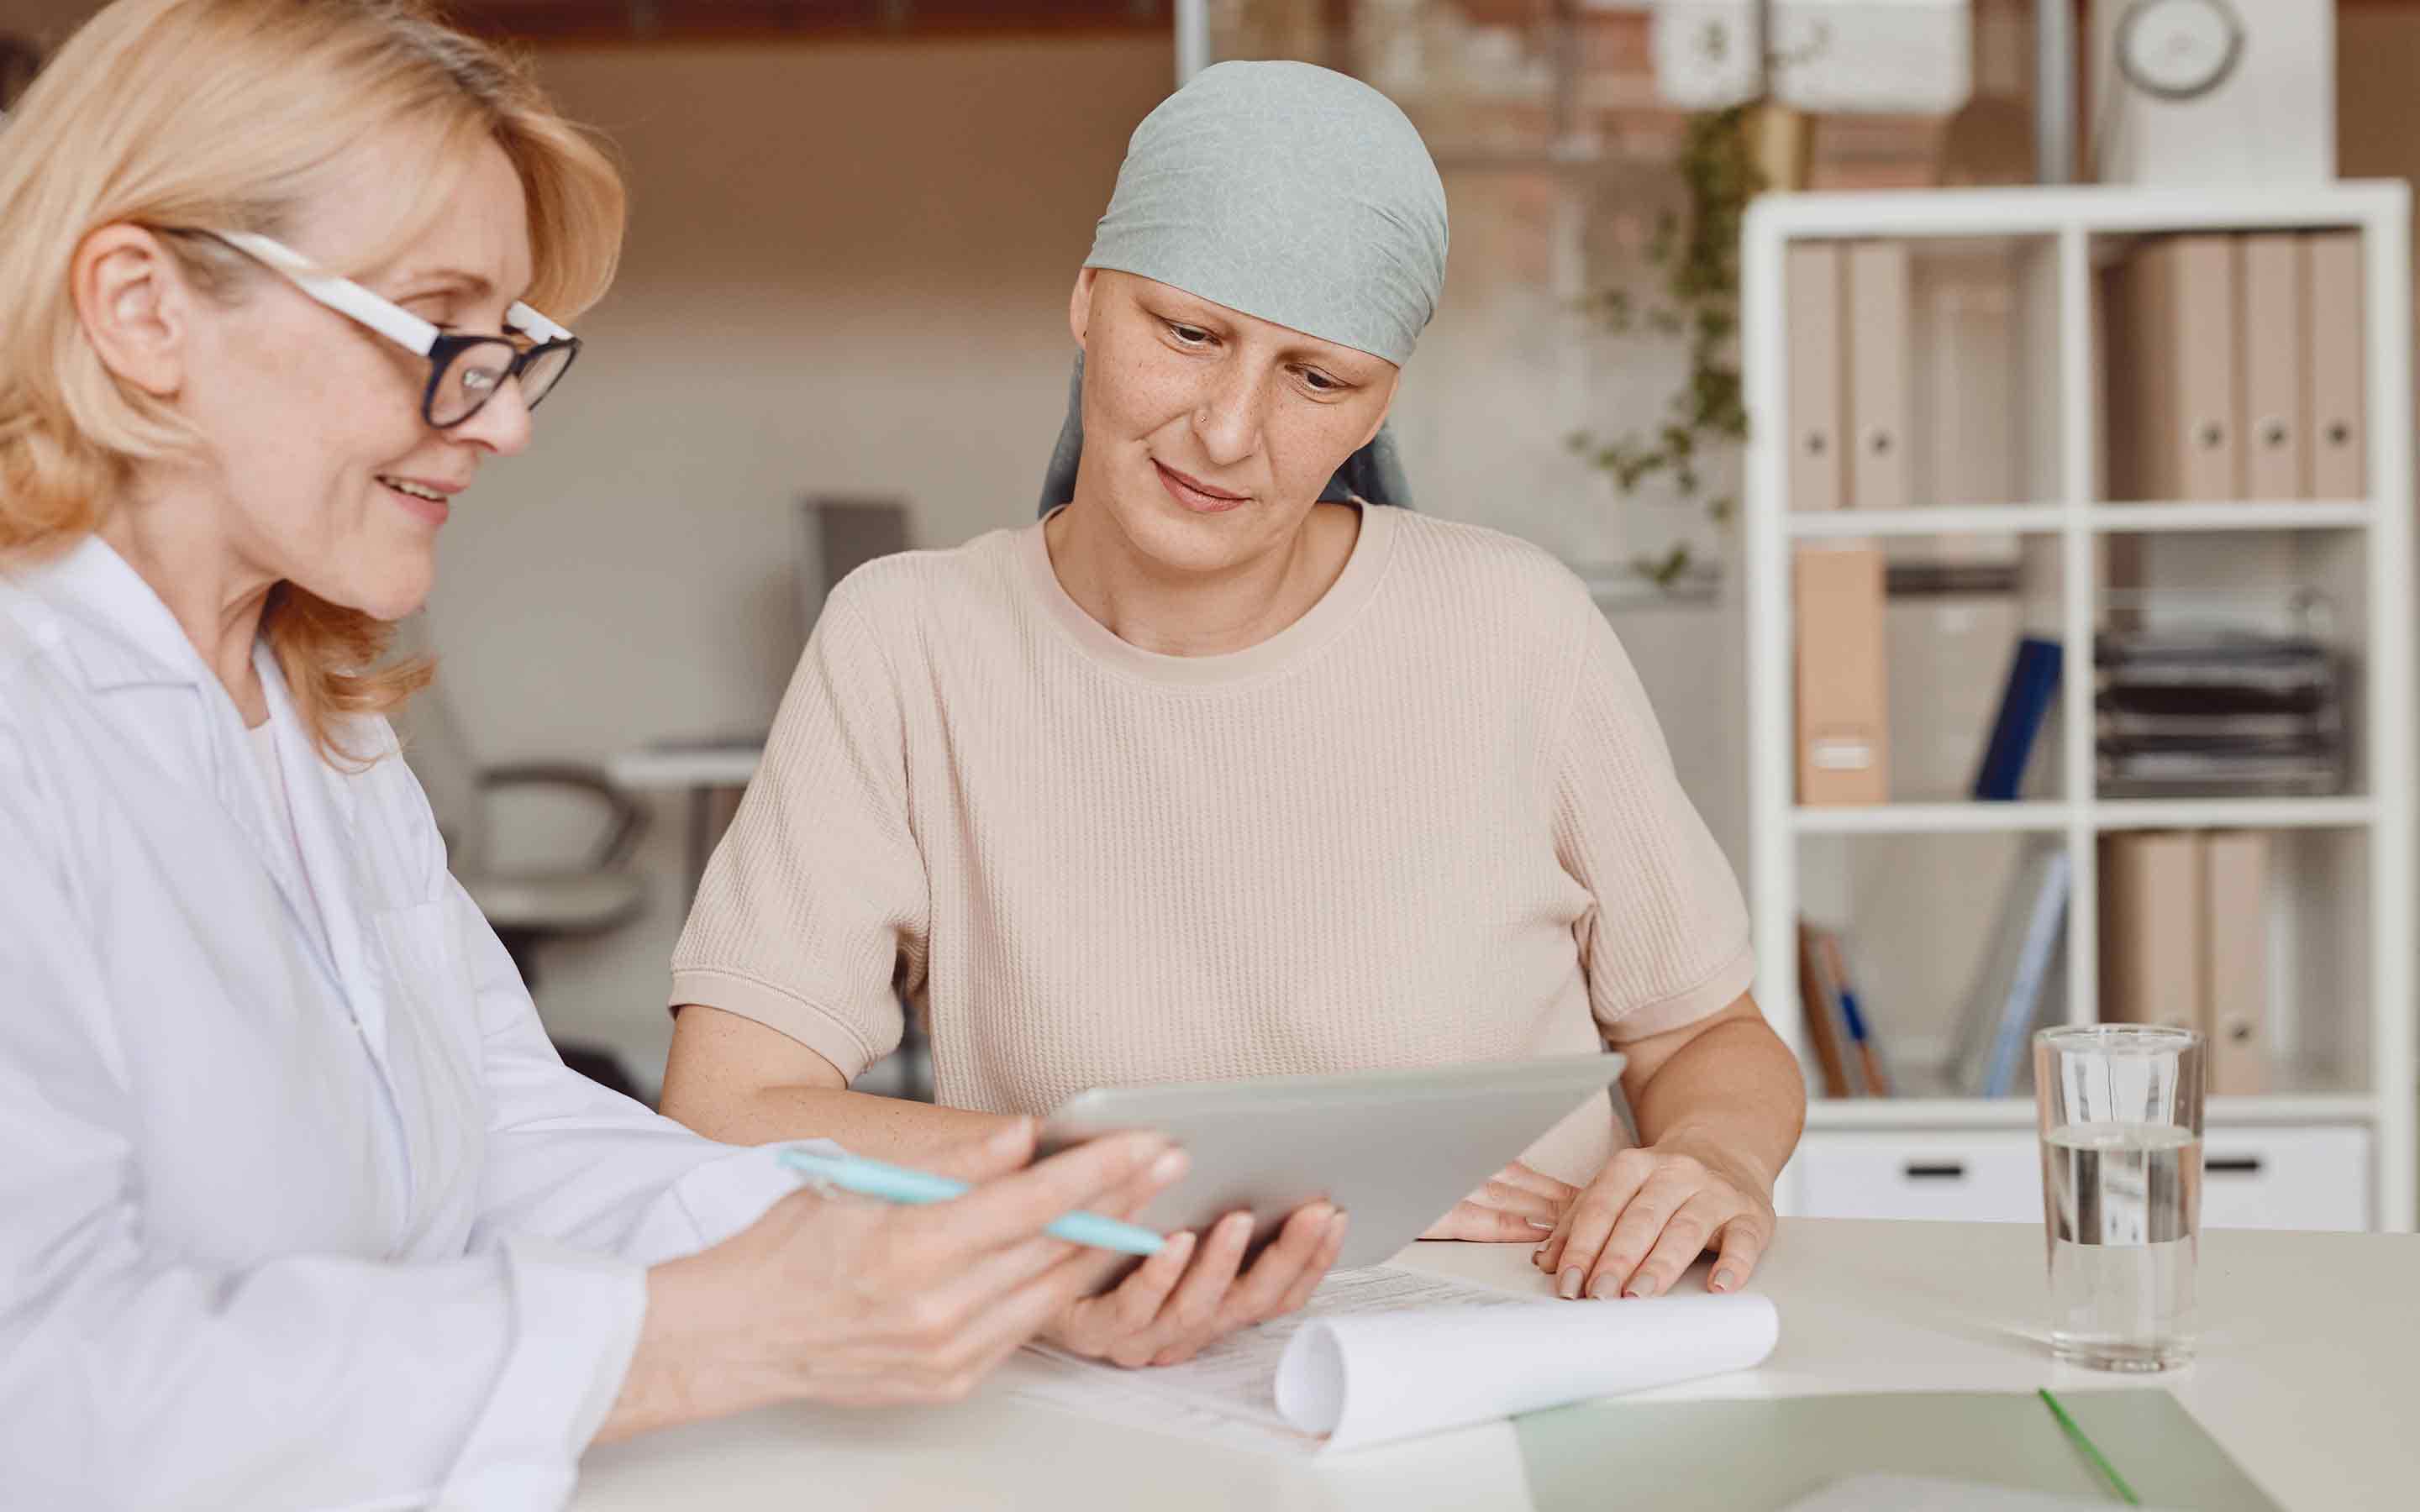 Cancer patient receiving support and information from a provider